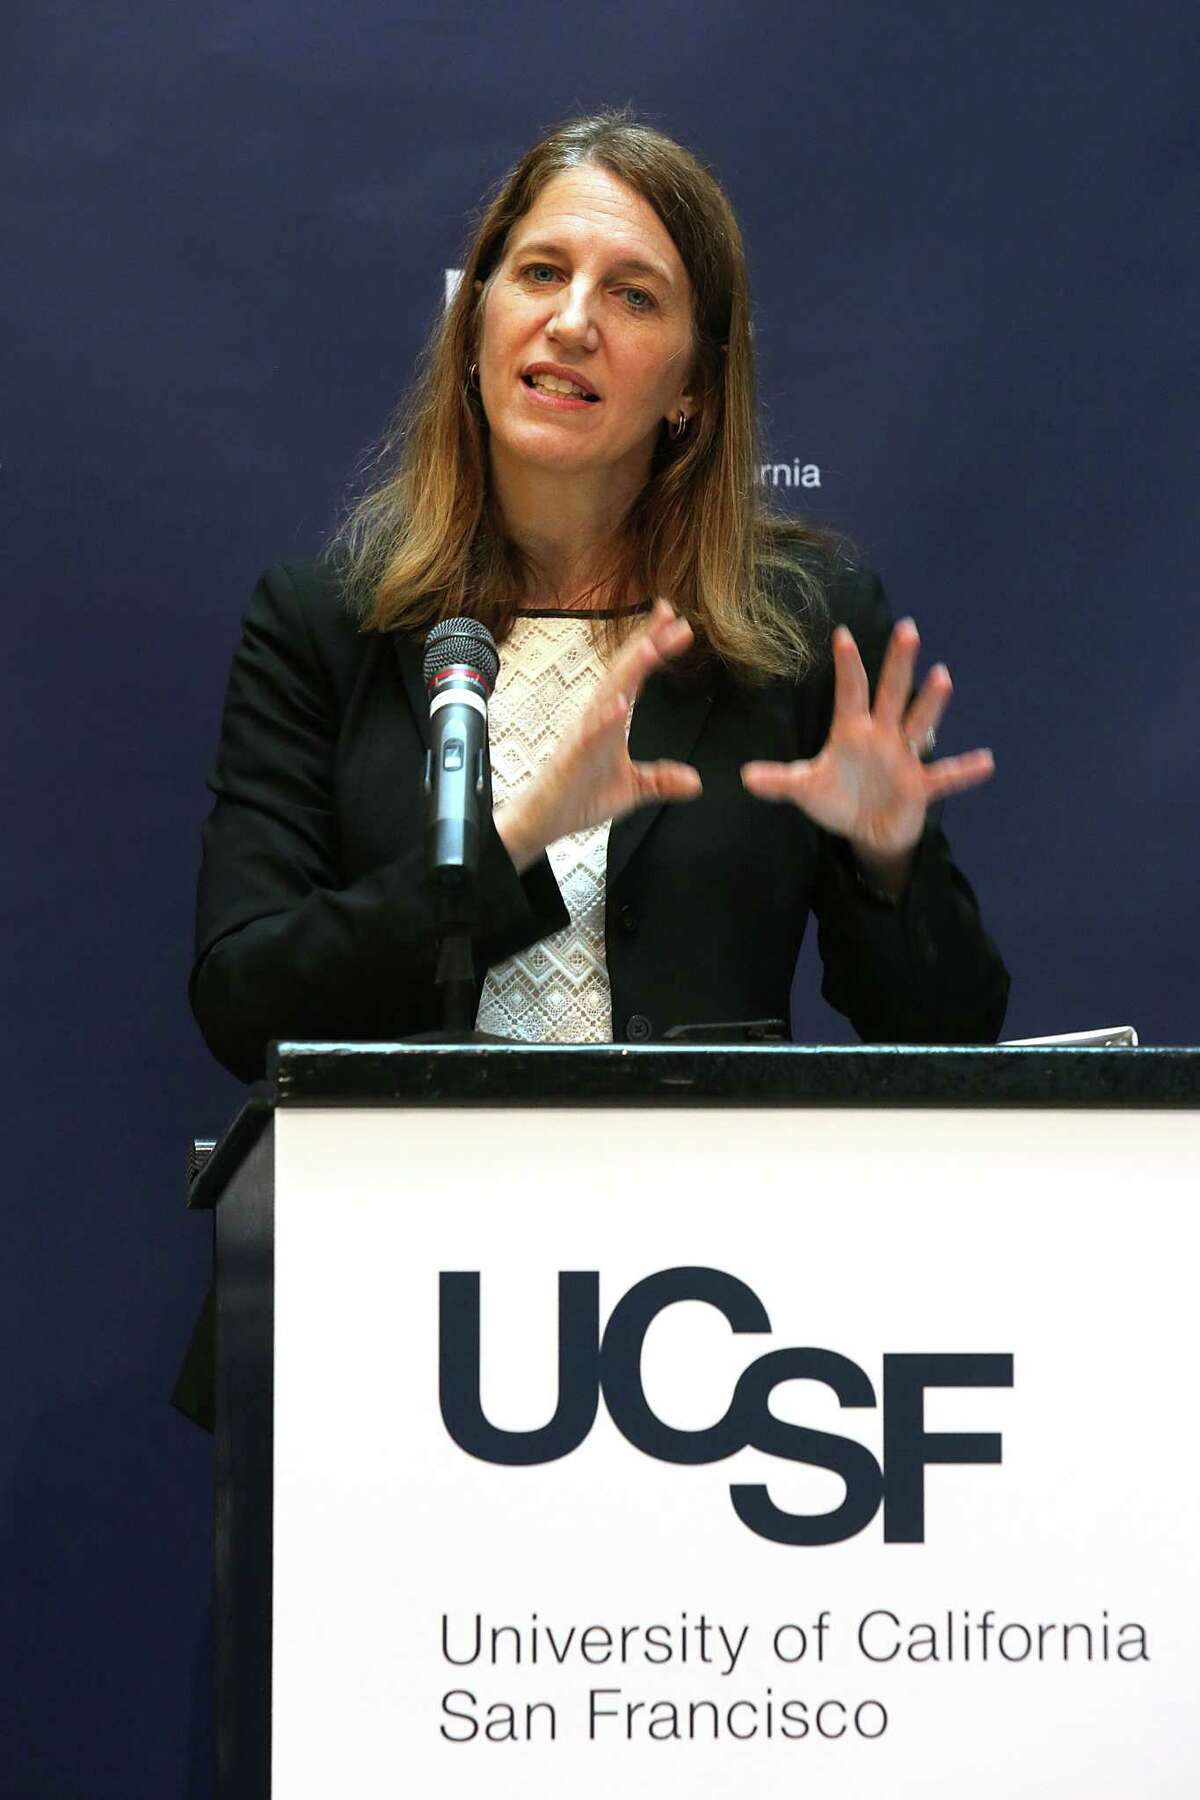 In March, Department of Health and Human Services Secretary Sylvia M. Burwell discussed President Obama’s Precision Medicine Initiative at UCSF.